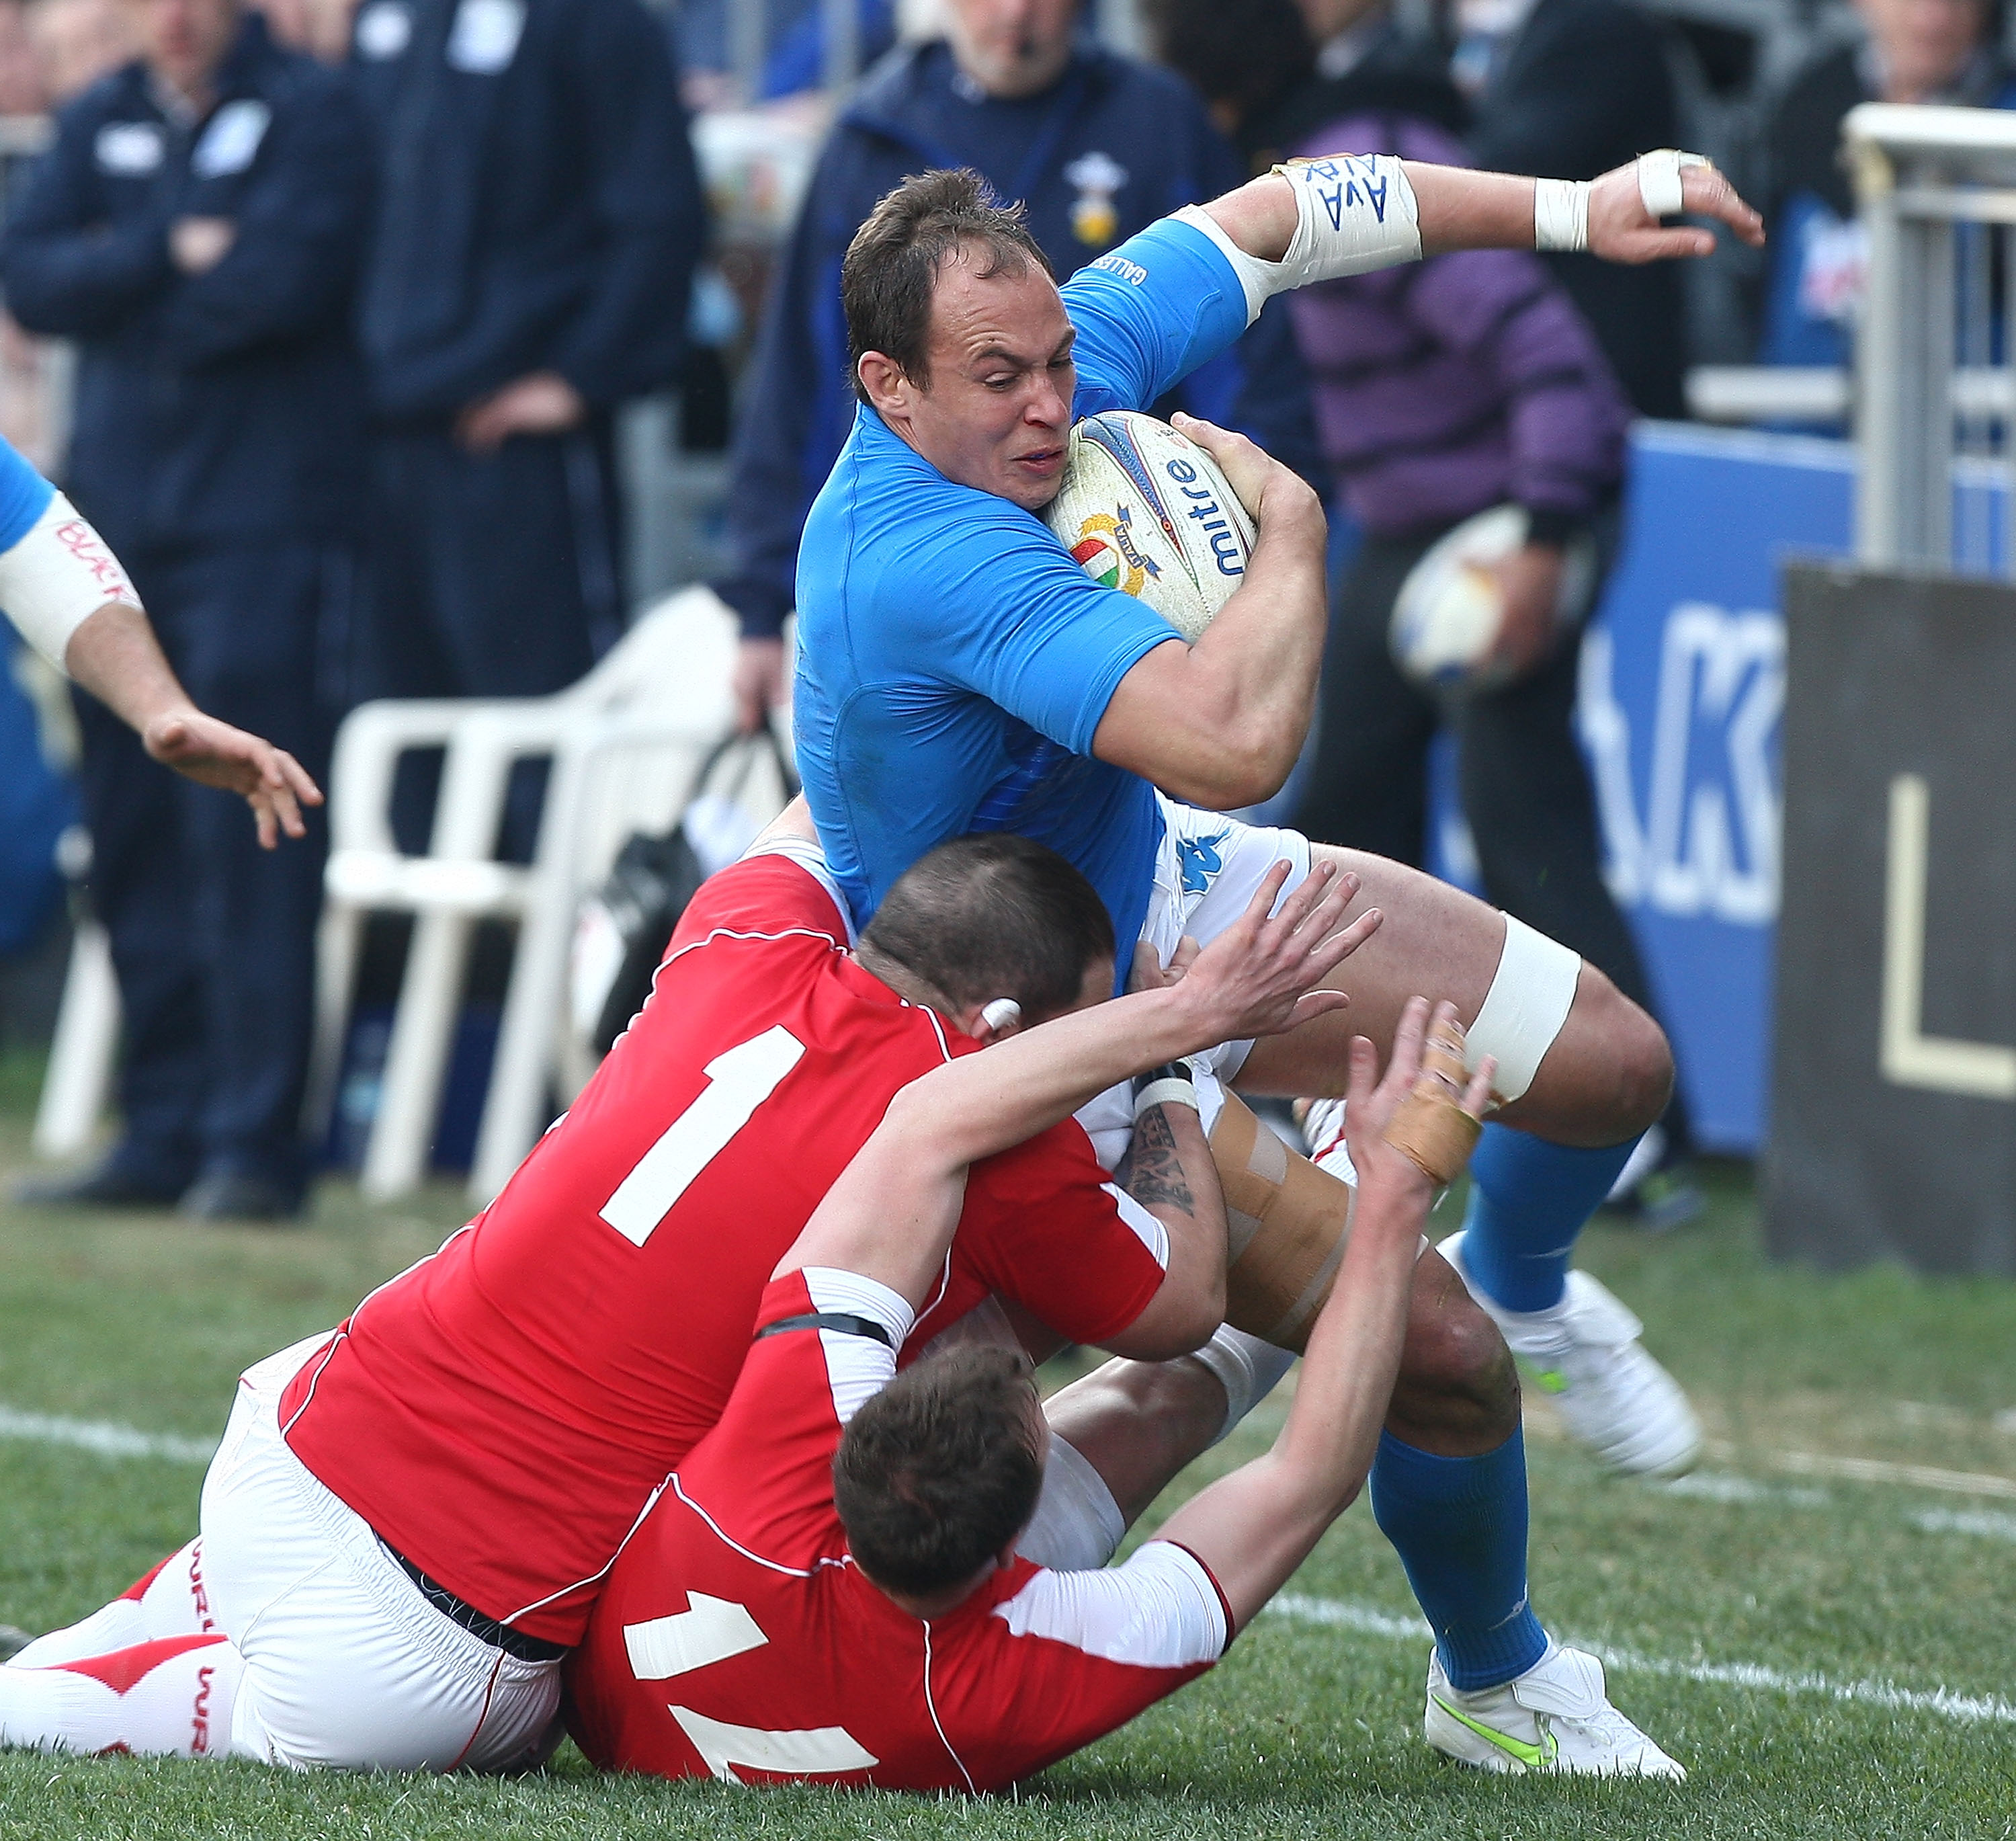 ROME, ITALY - FEBRUARY 26:  Sergio Parisse (R) of Italy is tackled during the RBS Six Nations match between Italy and Wales on February 26, 2011 in Rome, Italy.  (Photo by Paolo Bruno/Getty Images)